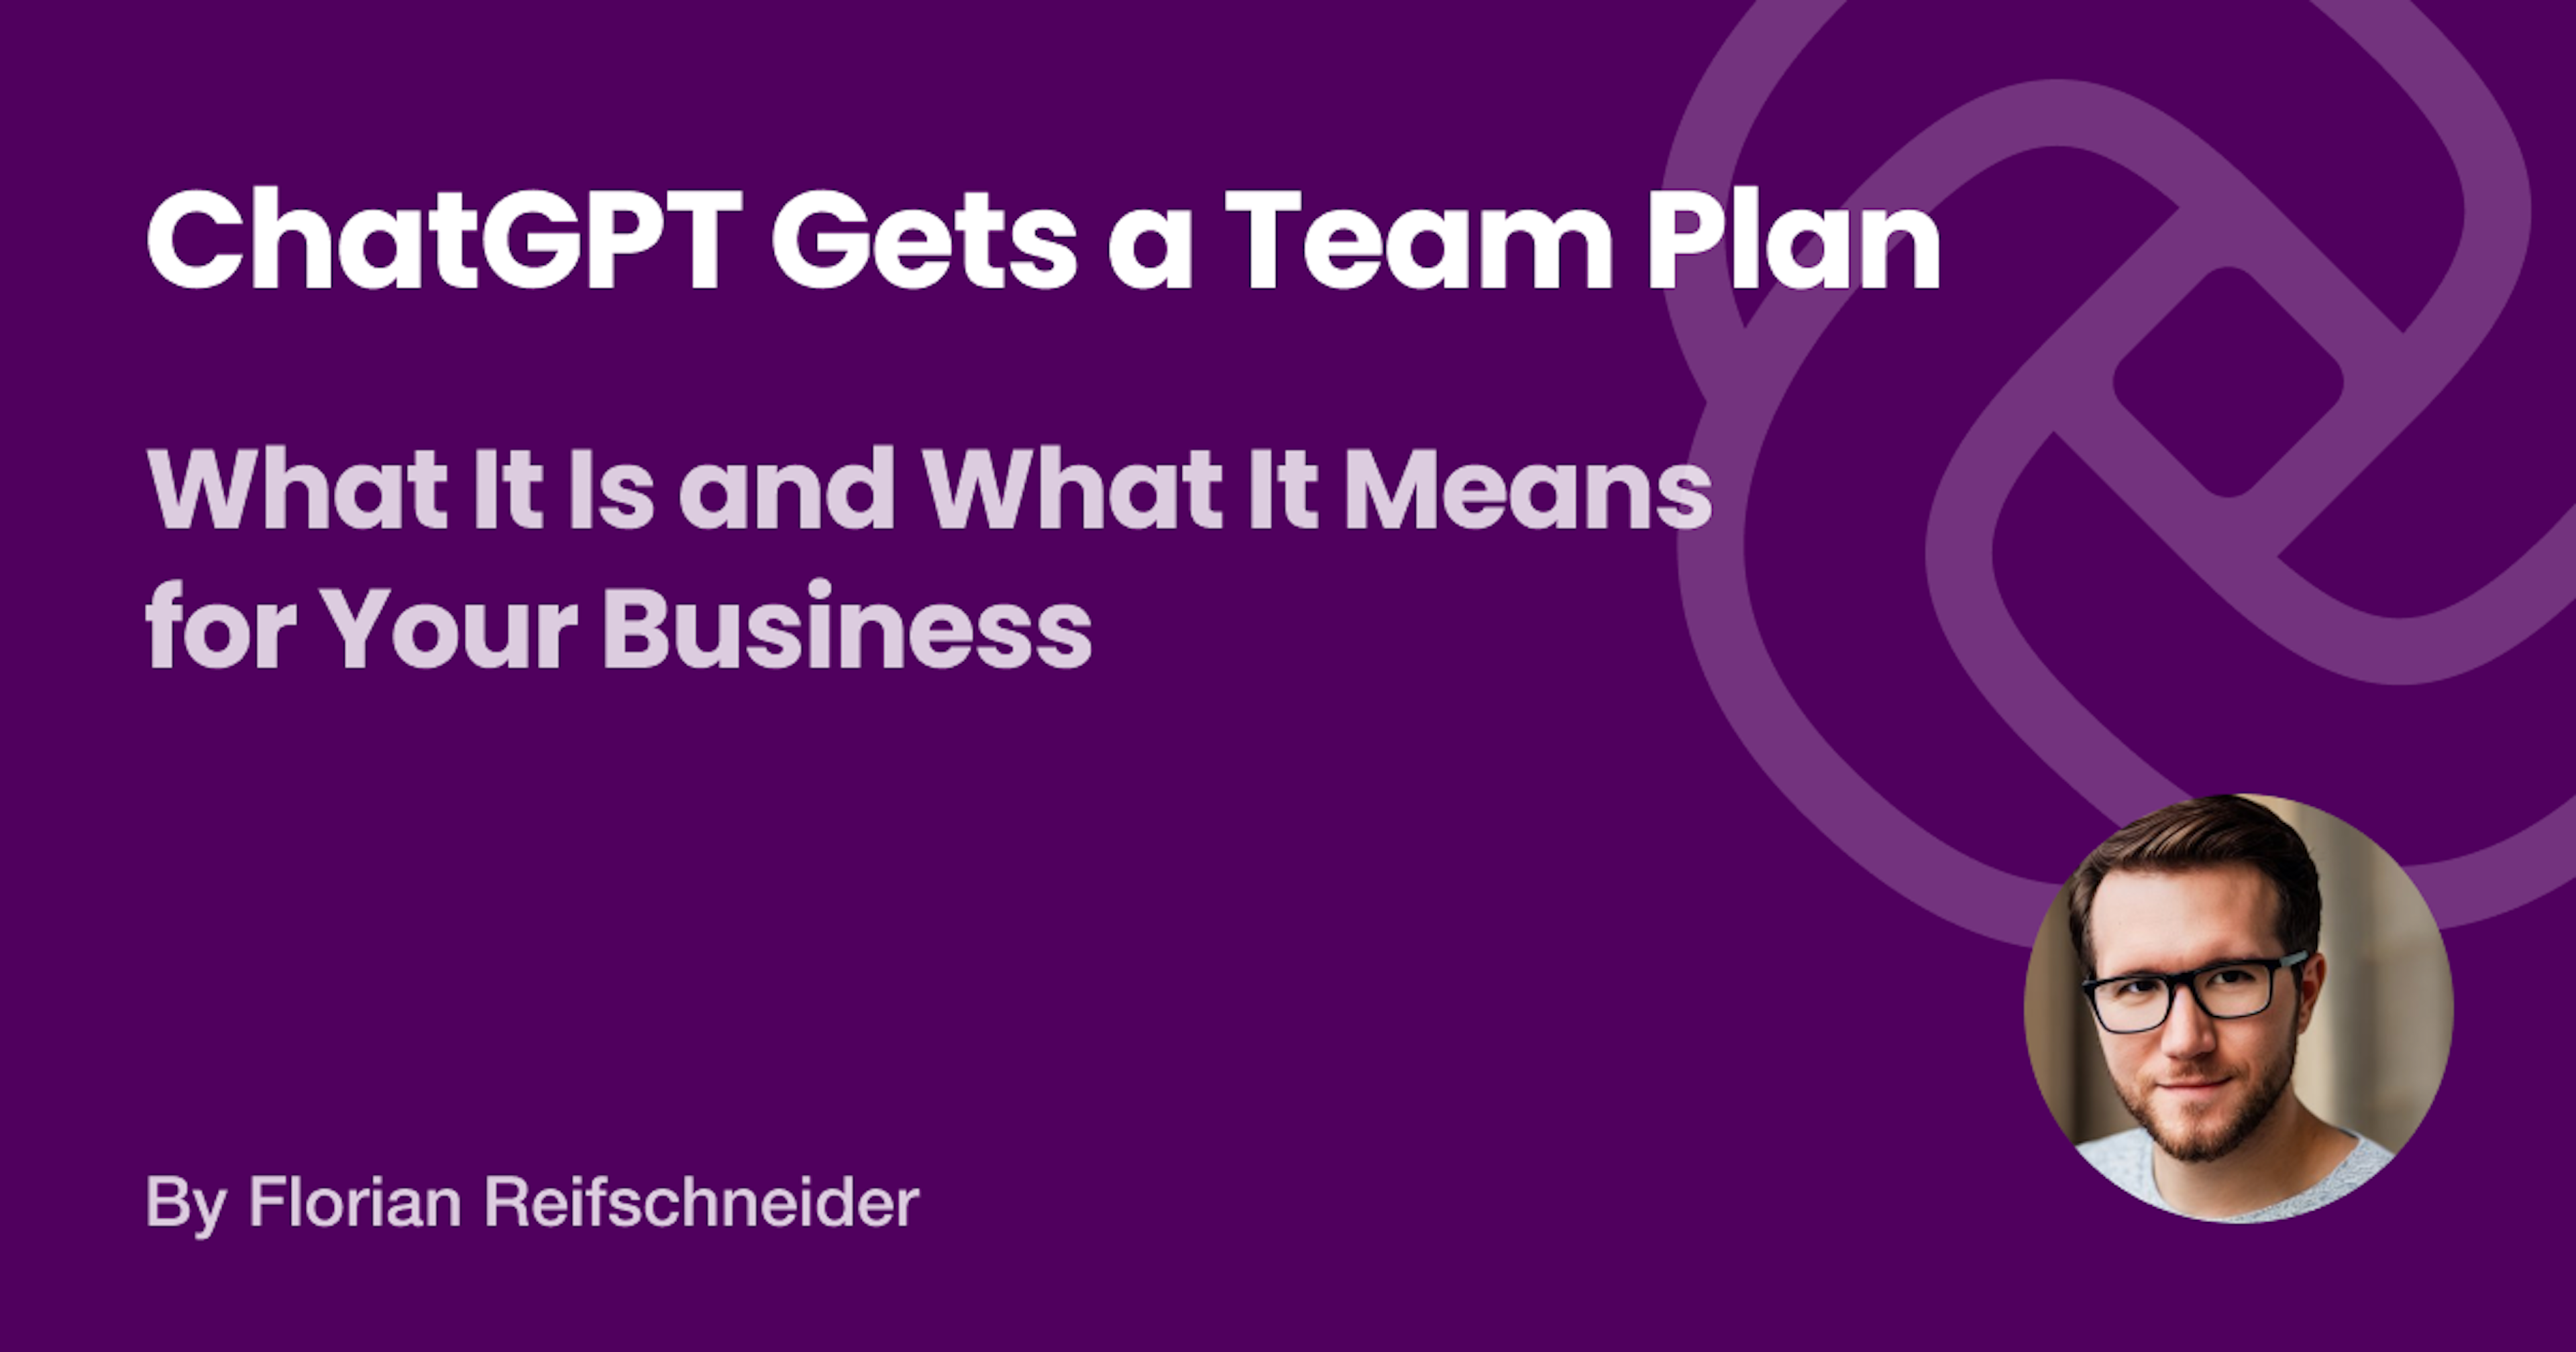 A new team plan for ChatGPT has arrived – make sure it’s enhancing your business, not exposing it.